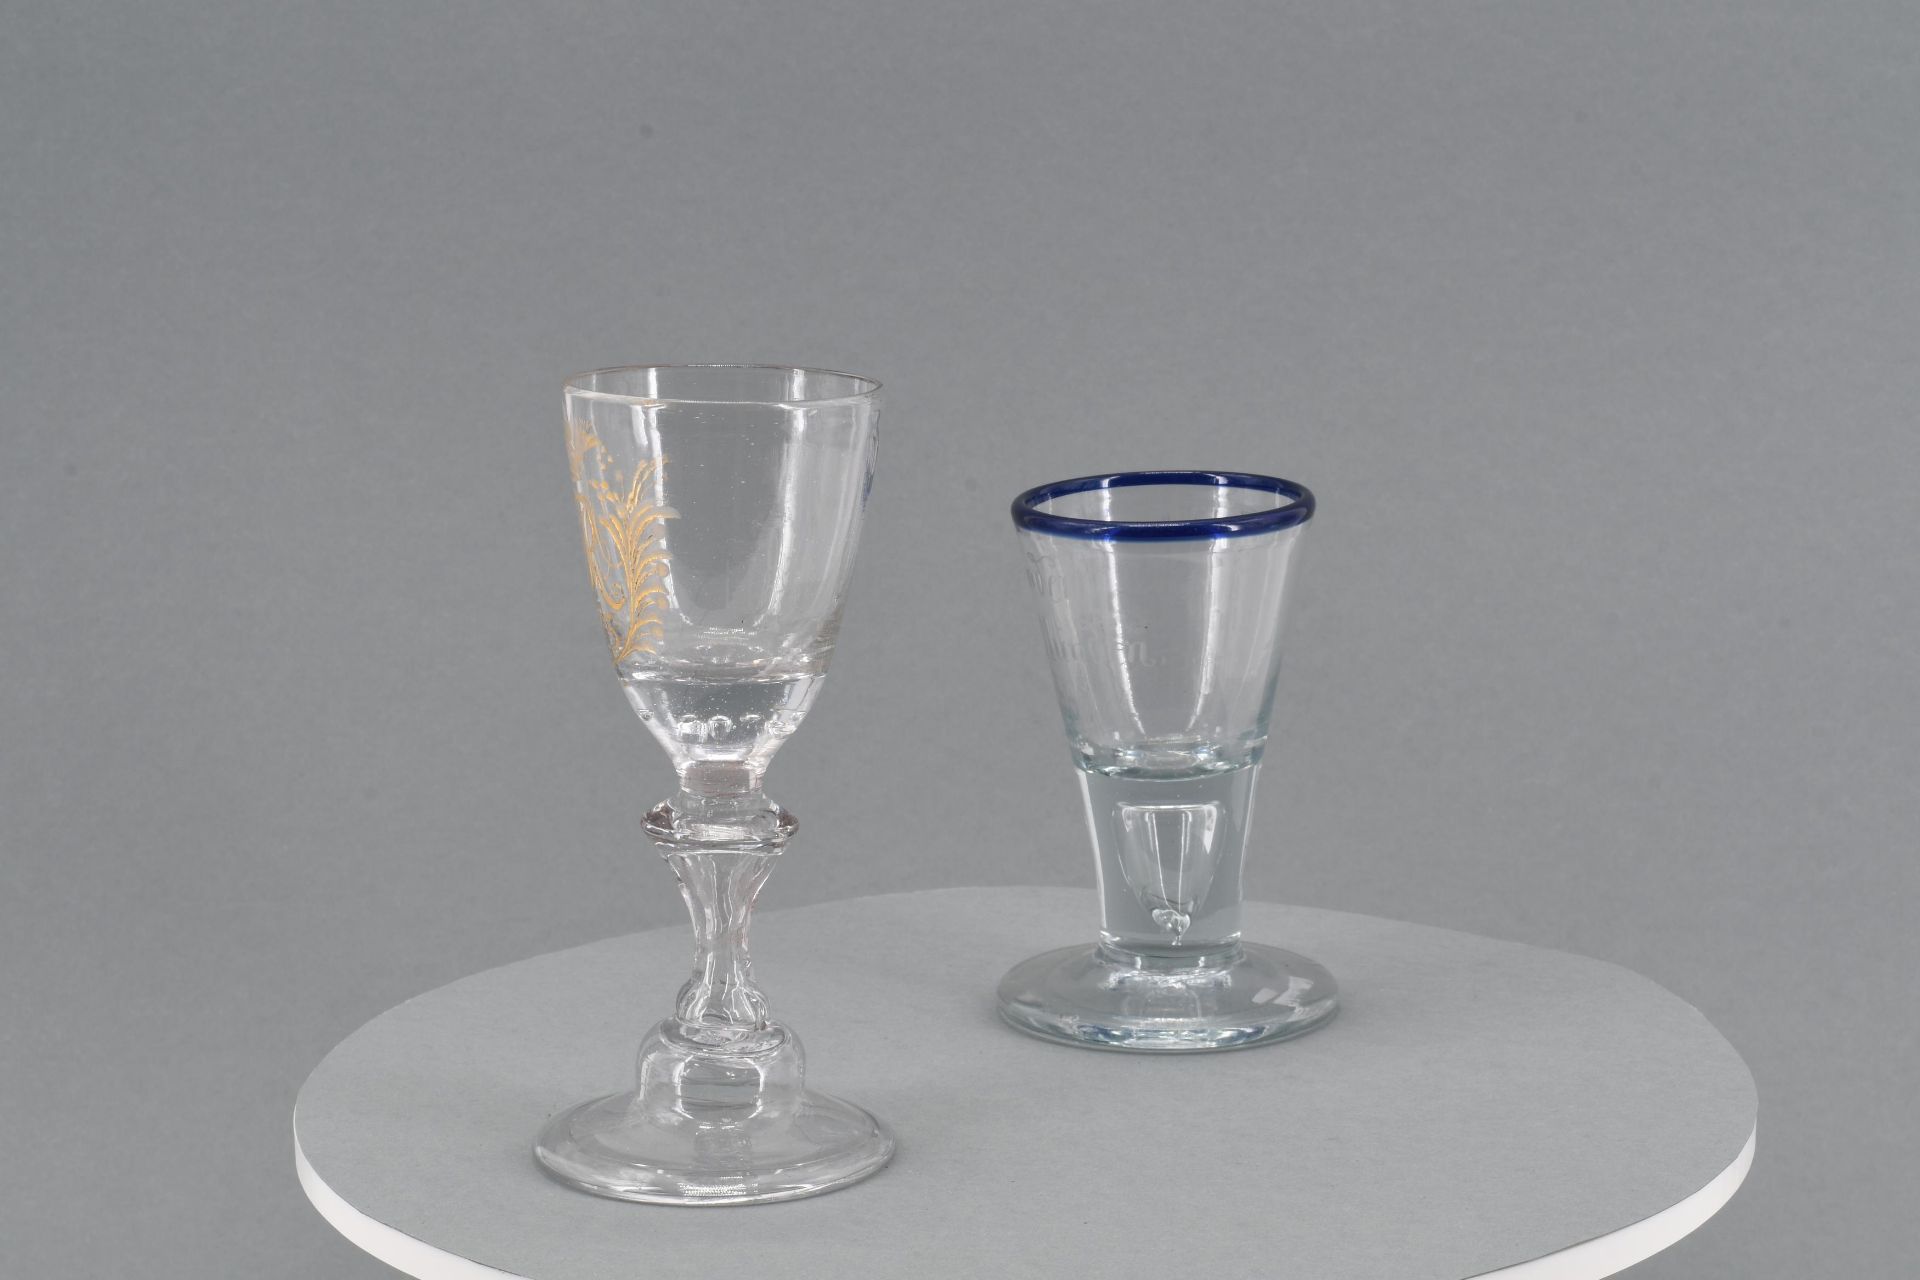 Goblet with monogram and schnapps glass with blue rim - Image 4 of 15